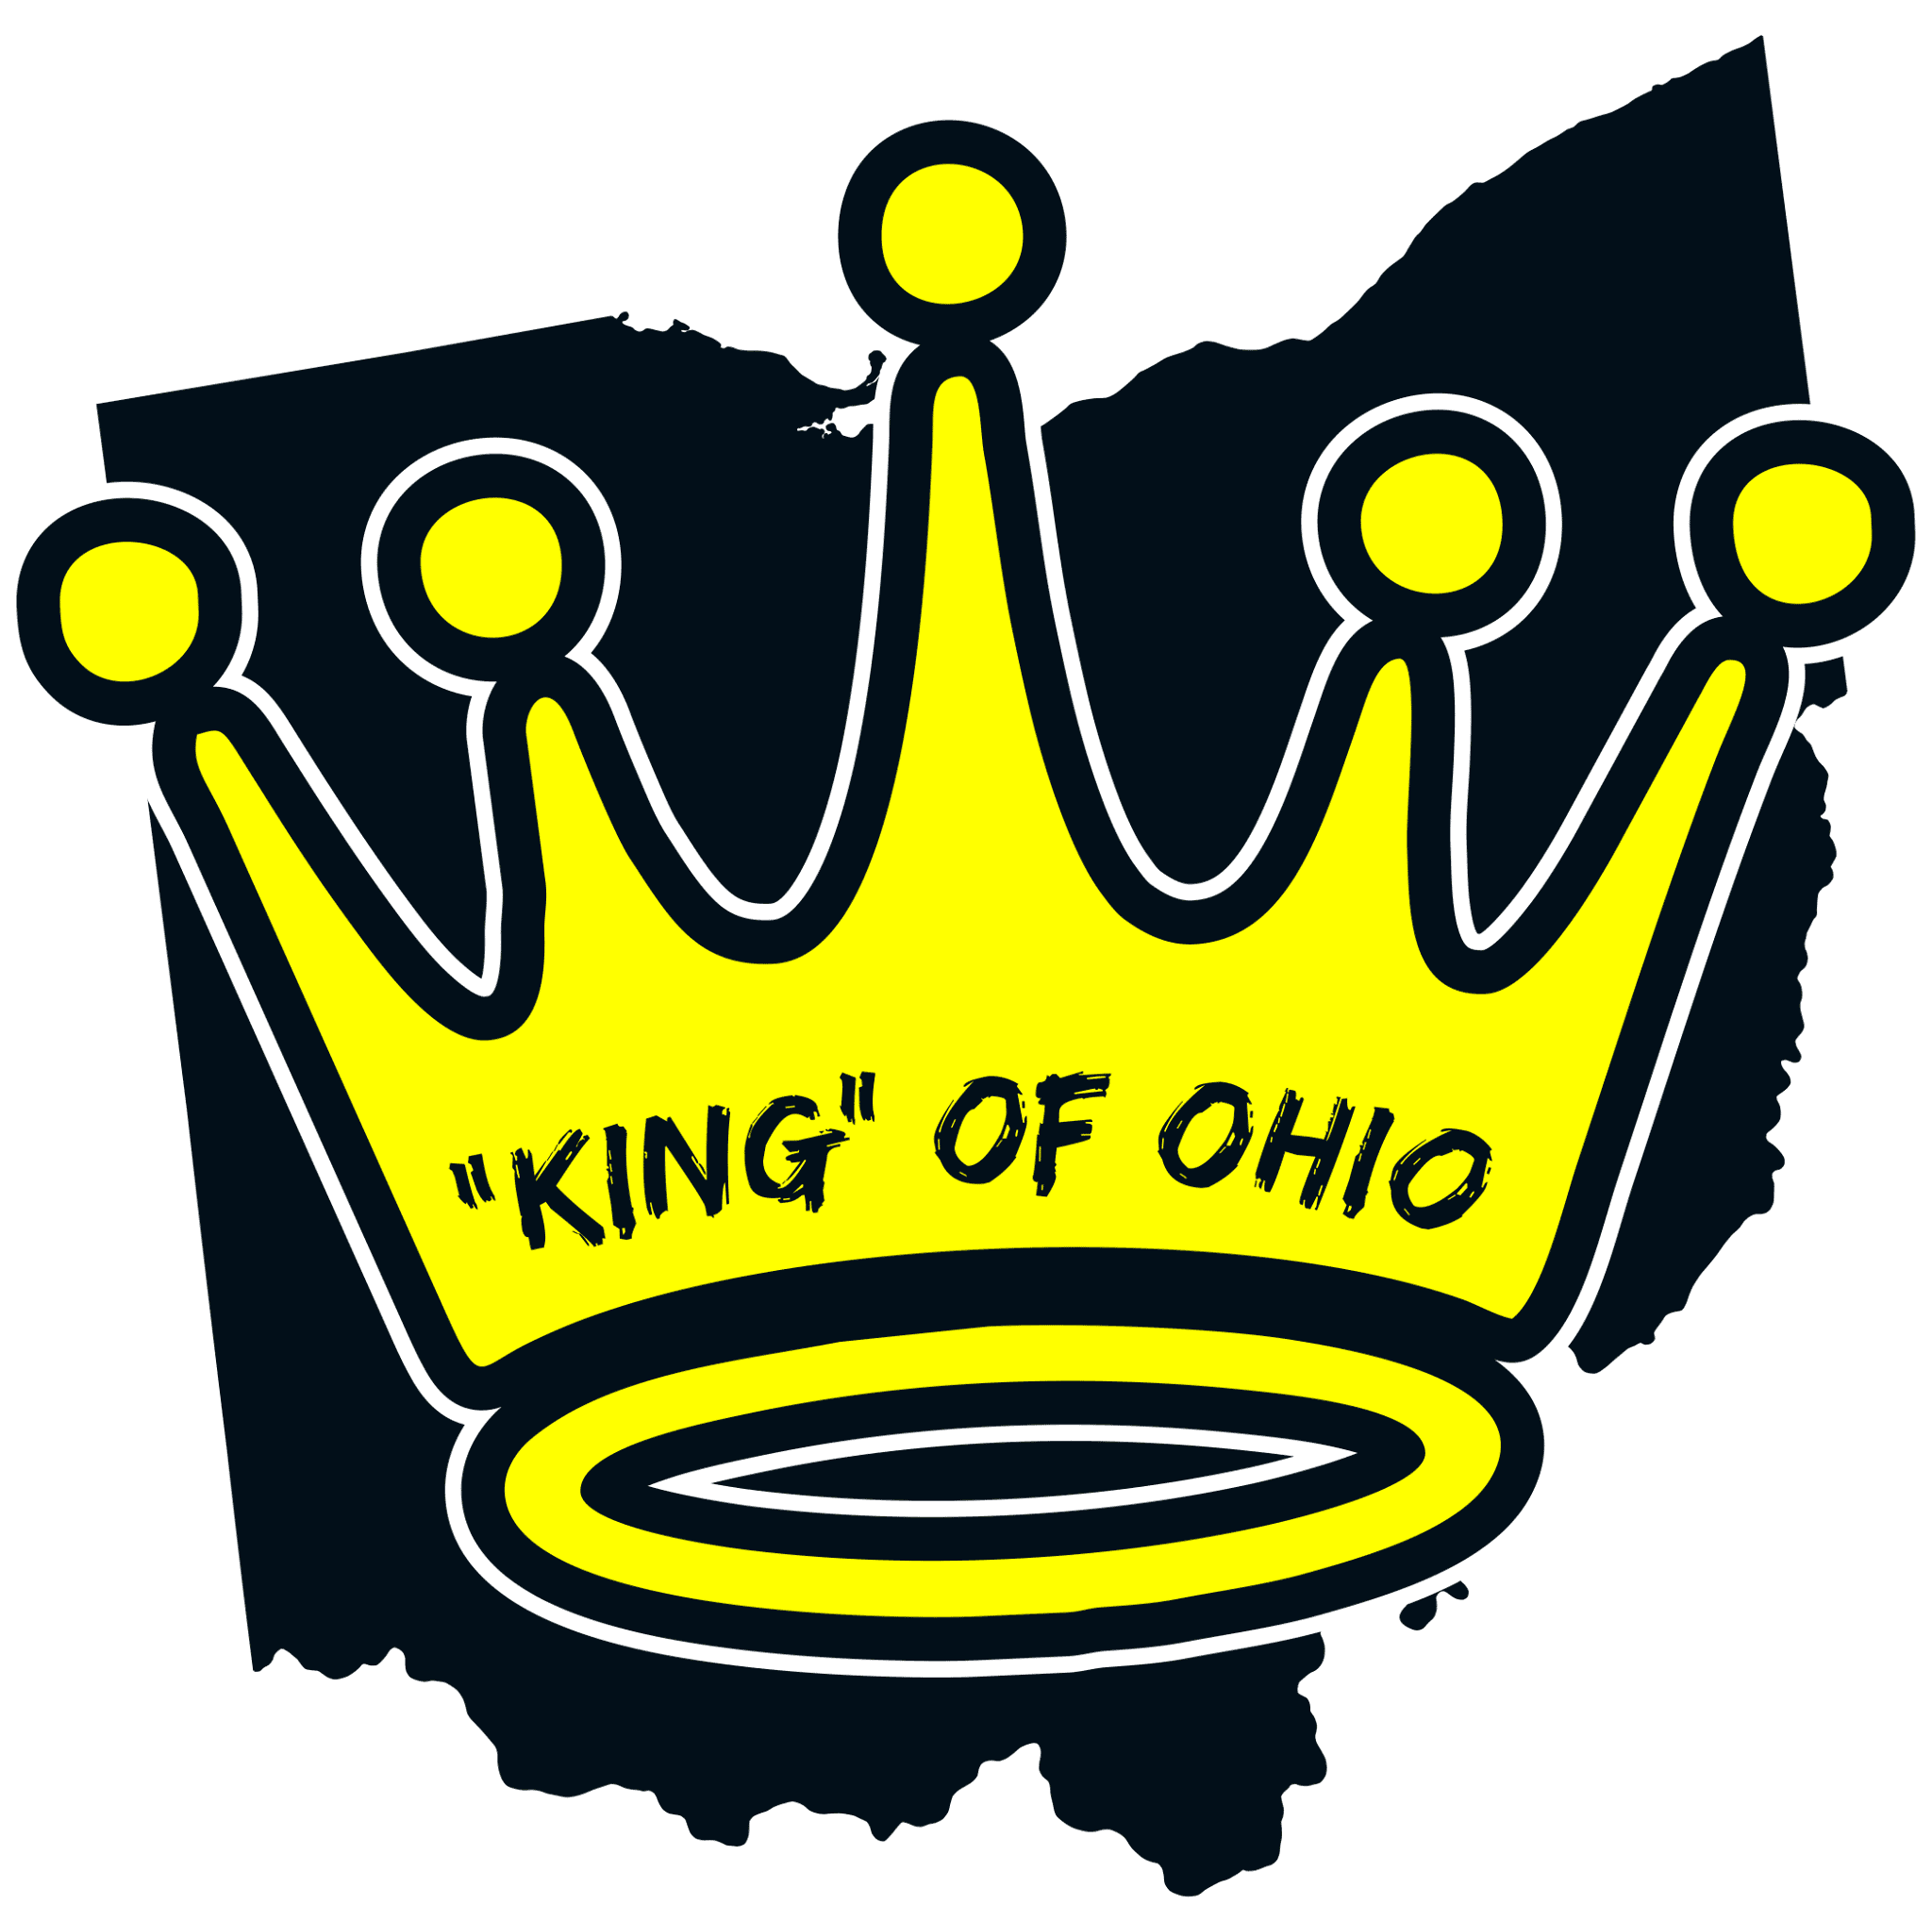 “King” of Ohio – The Crown Jewel of Ohio’s Demolition Derby